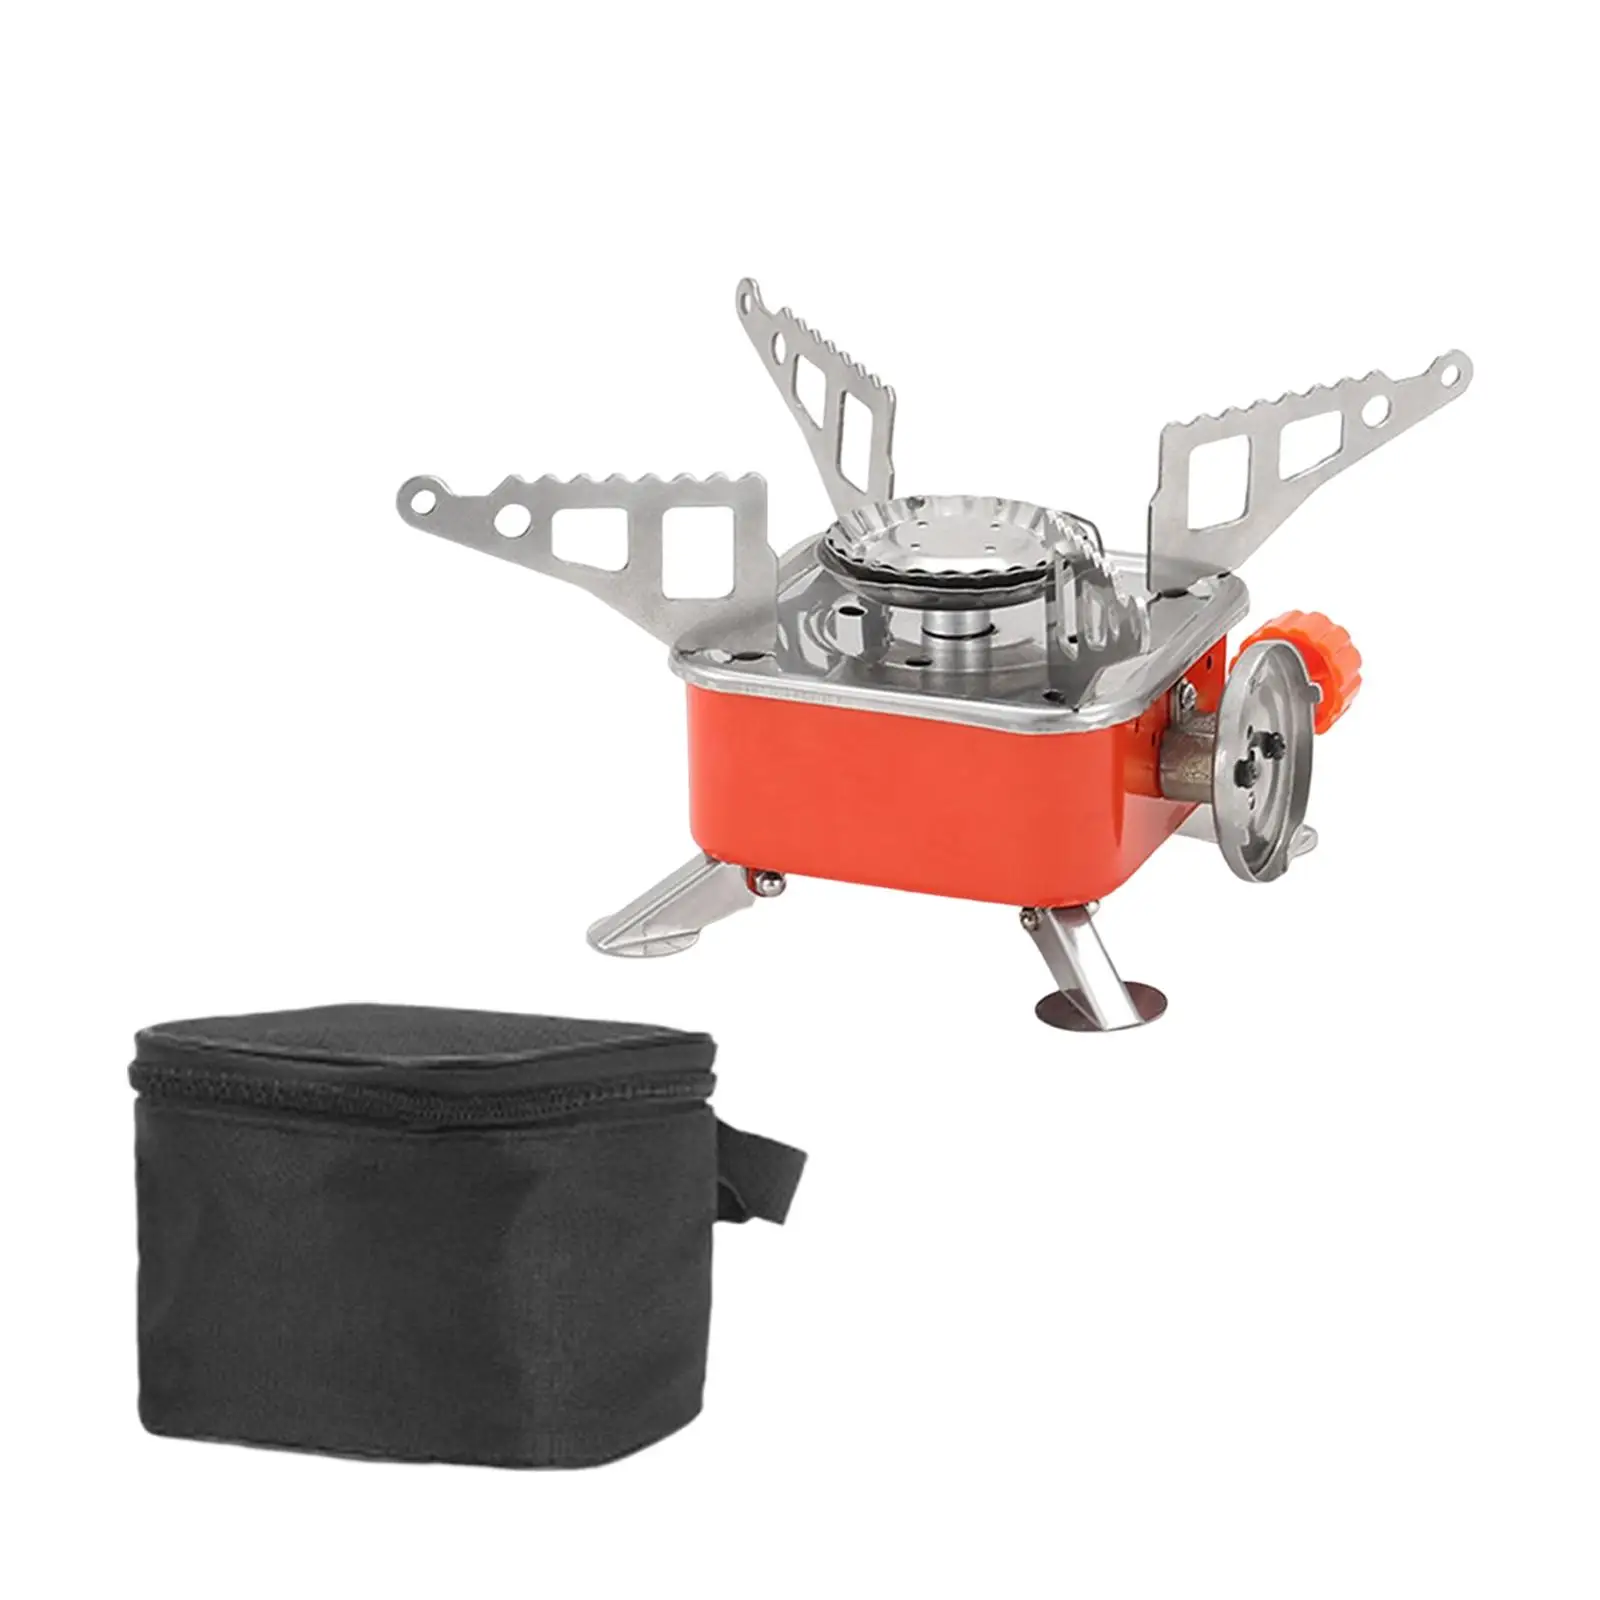 Camping Gas Stove with Storage Case Camp Stove Cooker Gear for Fishing